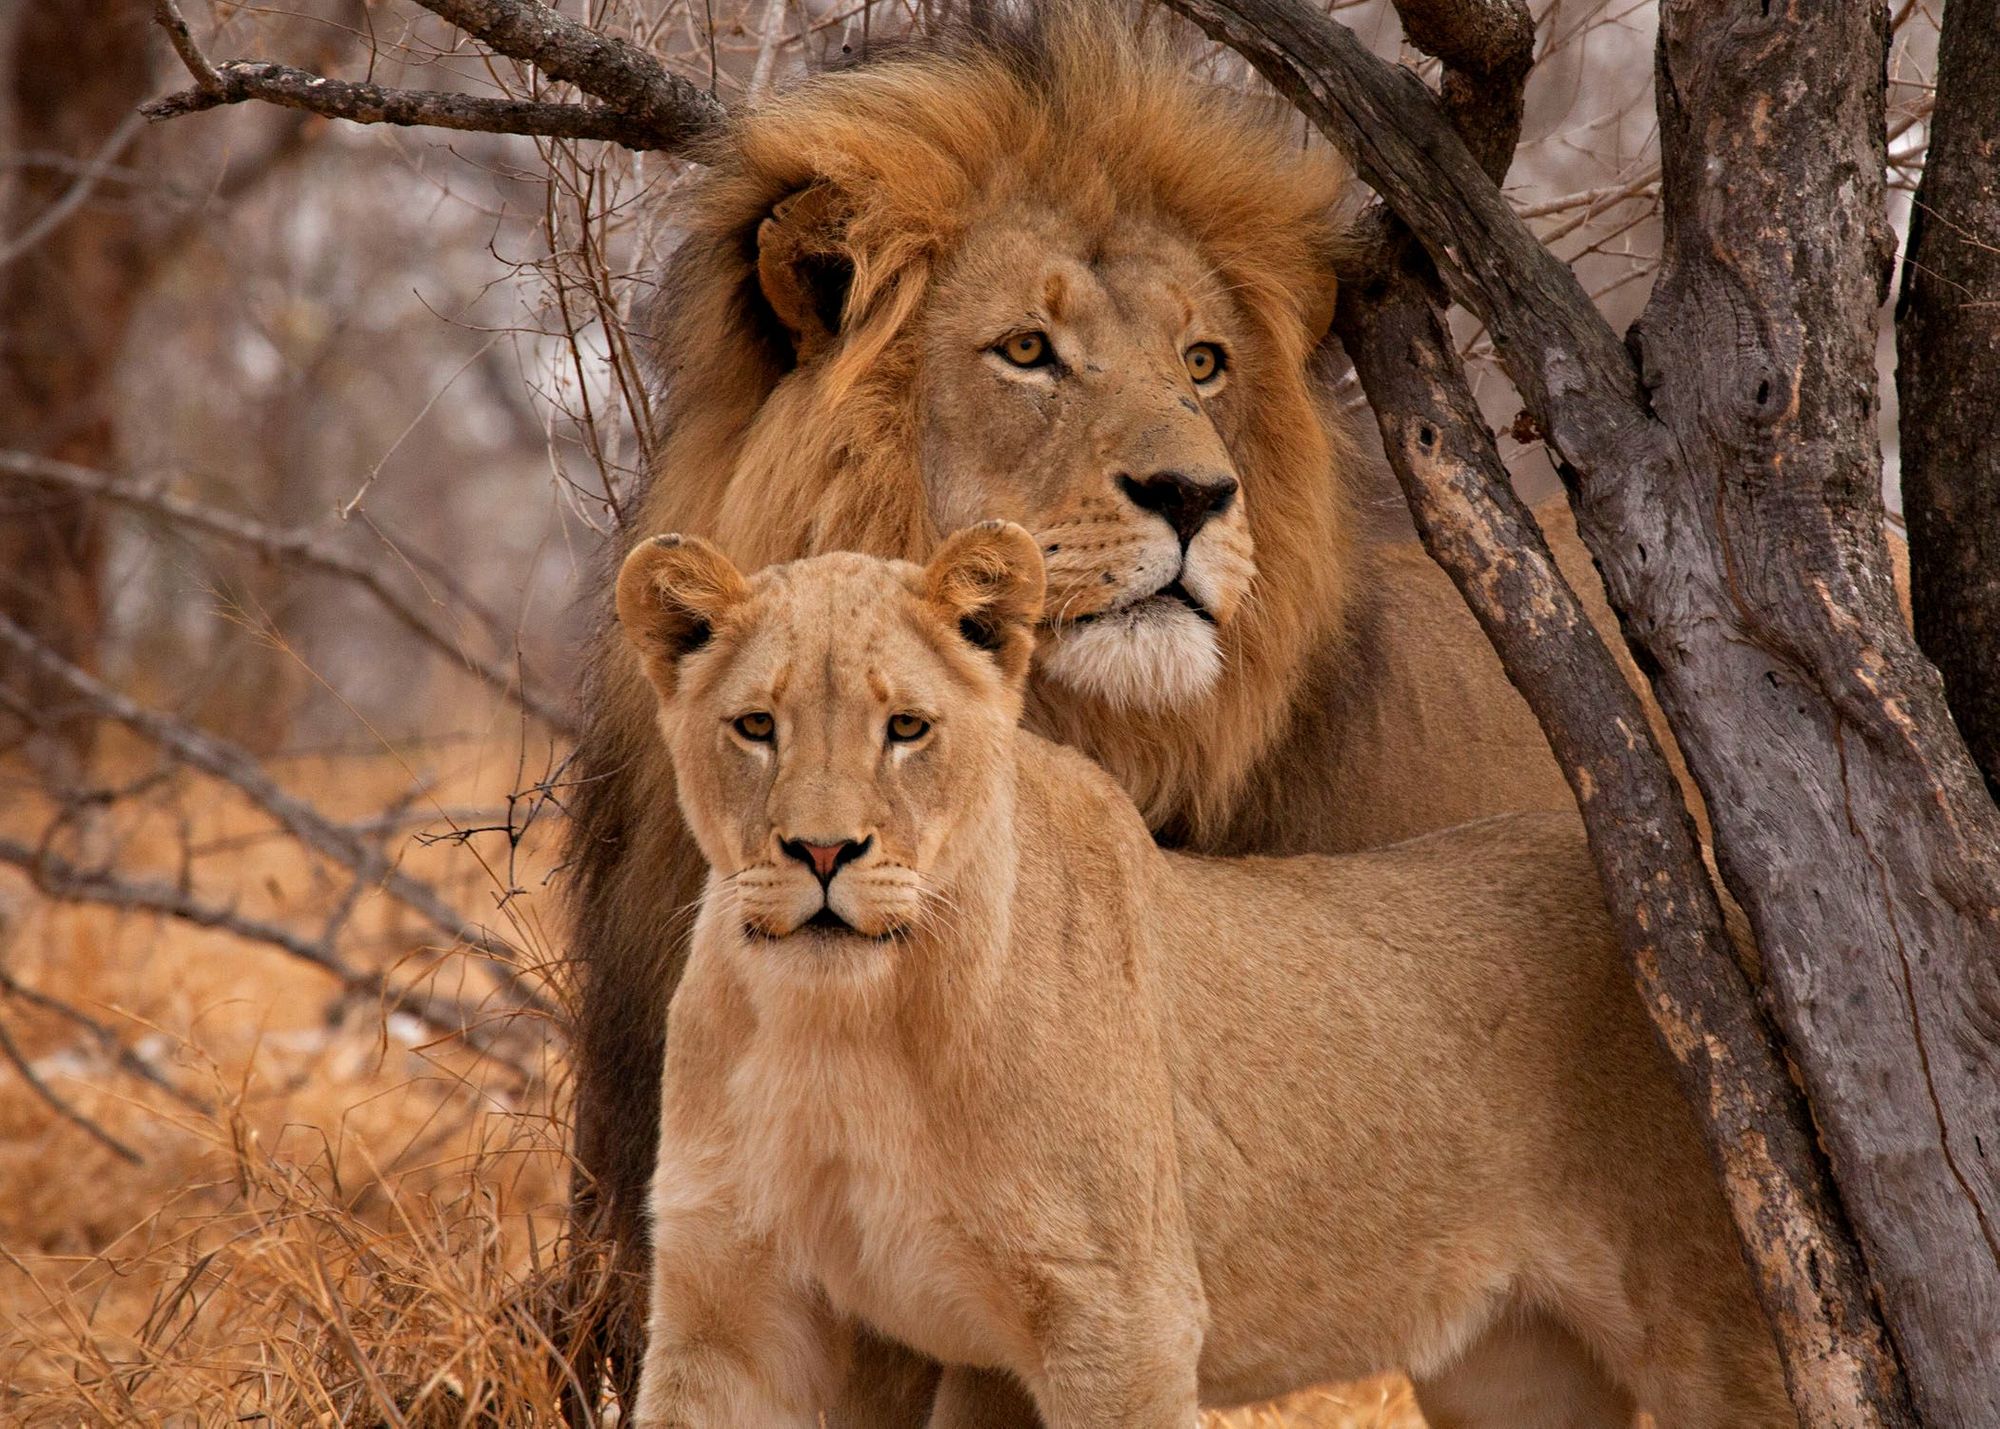 Two lions in South Africa